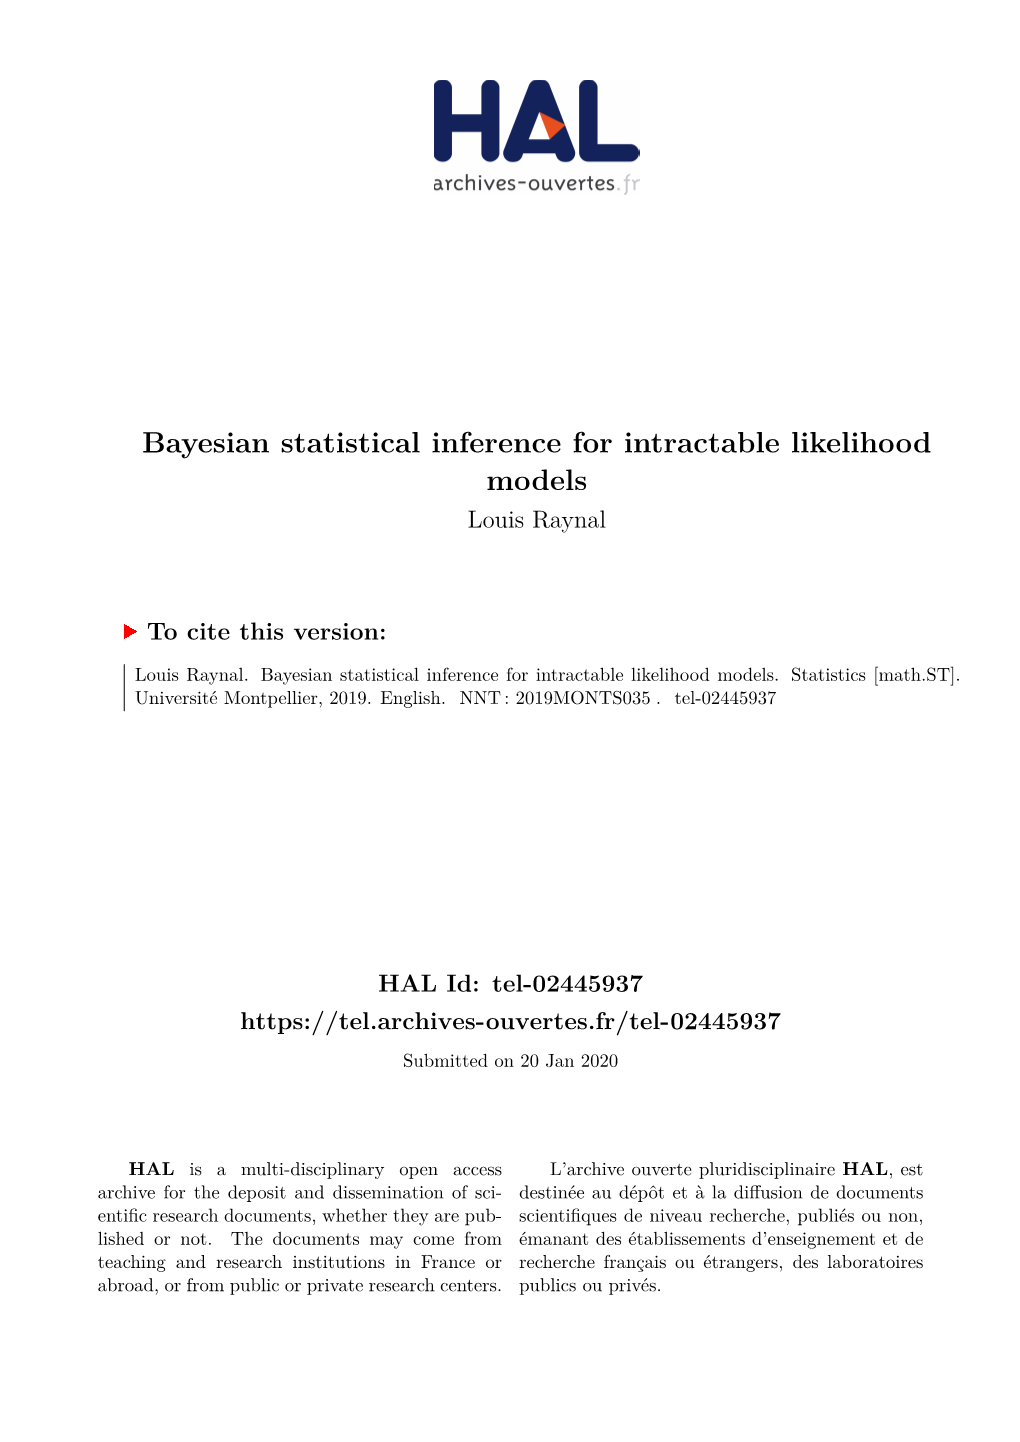 Bayesian Statistical Inference for Intractable Likelihood Models Louis Raynal